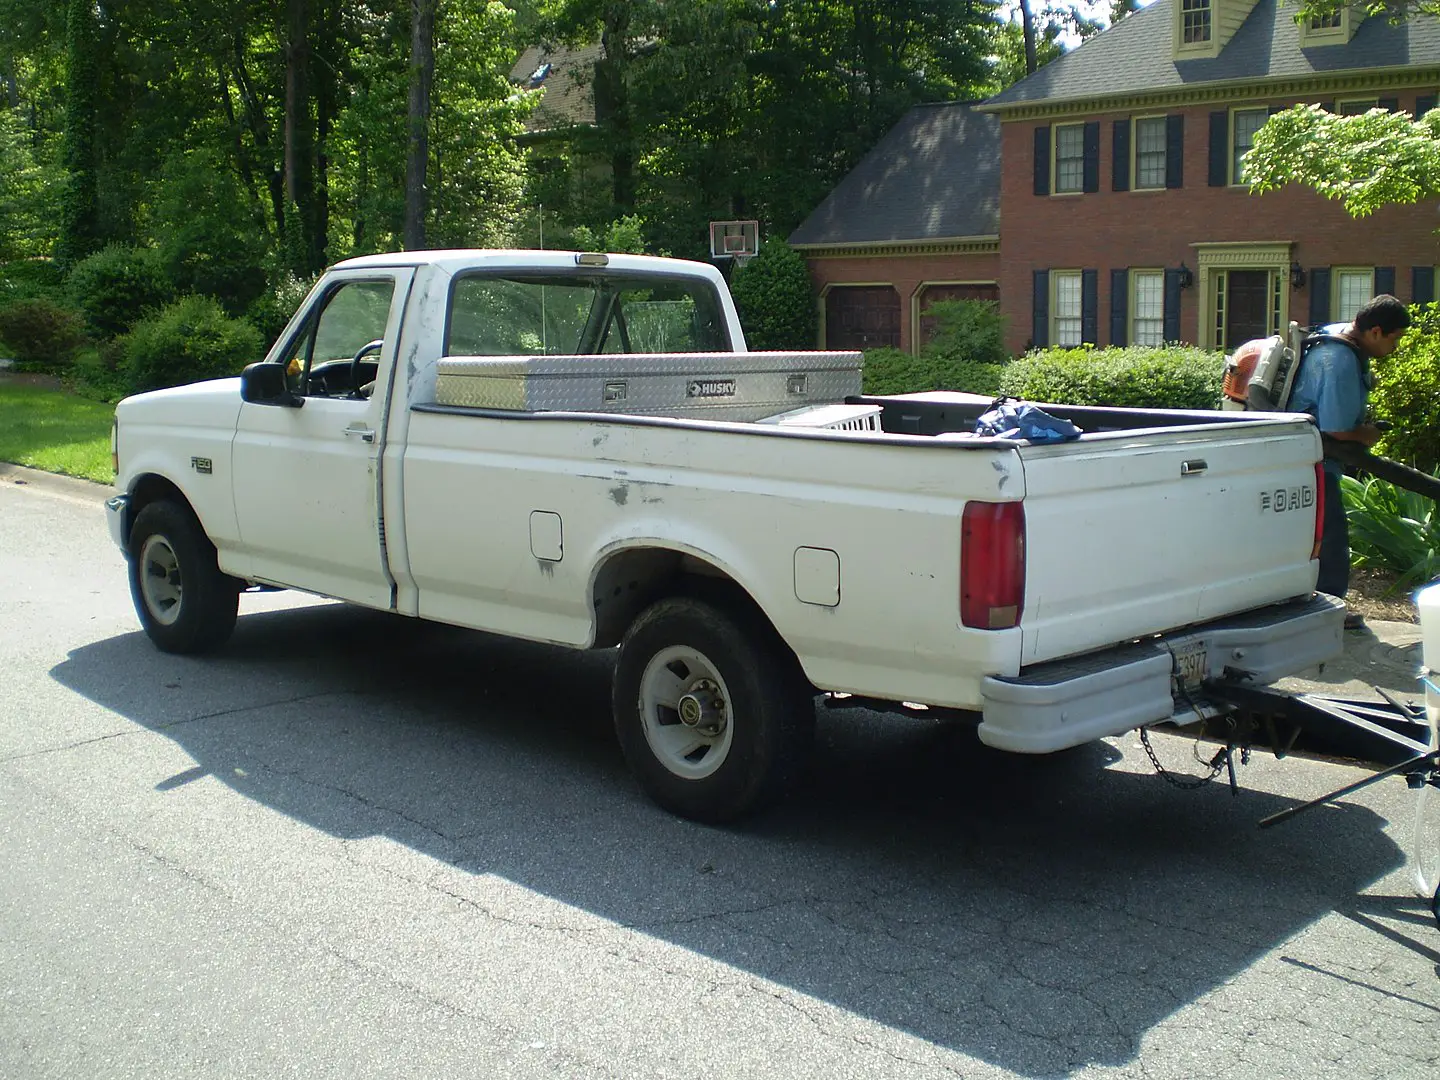 Example of a F150